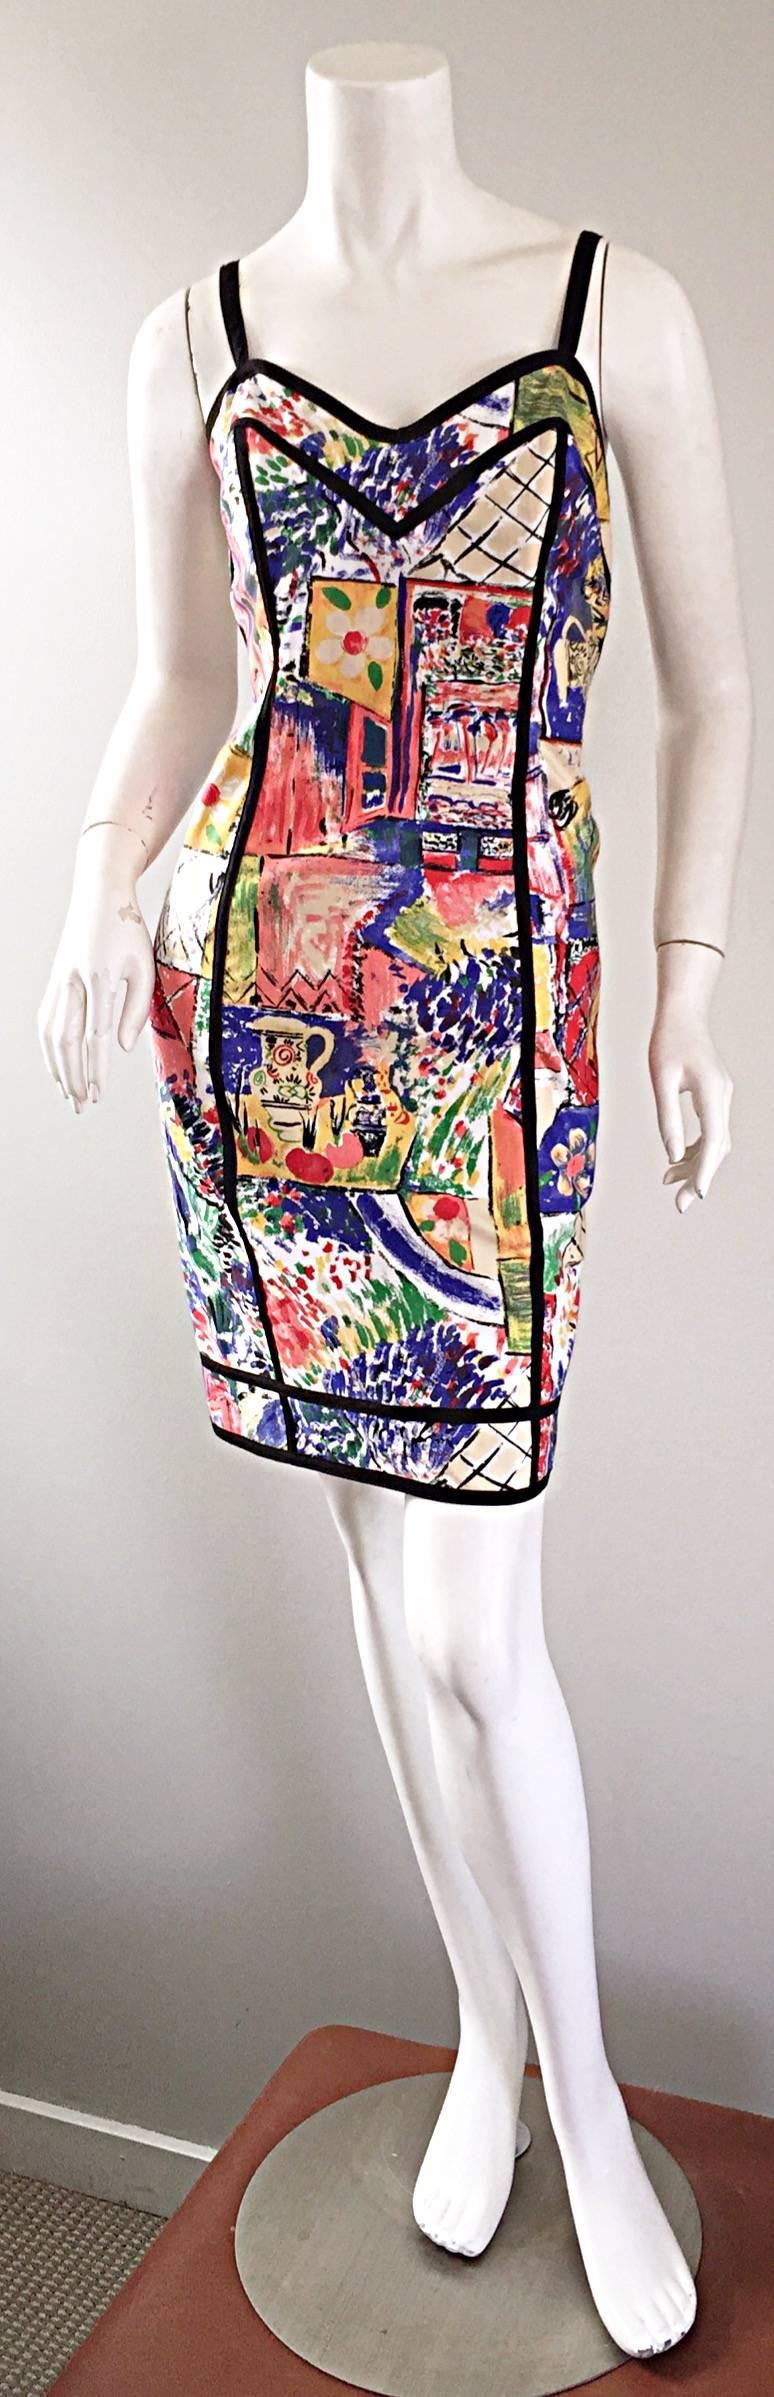 1990s Jan Barboglio Hand Painted Watercolor Vintage Cotton Novelty Dress 1